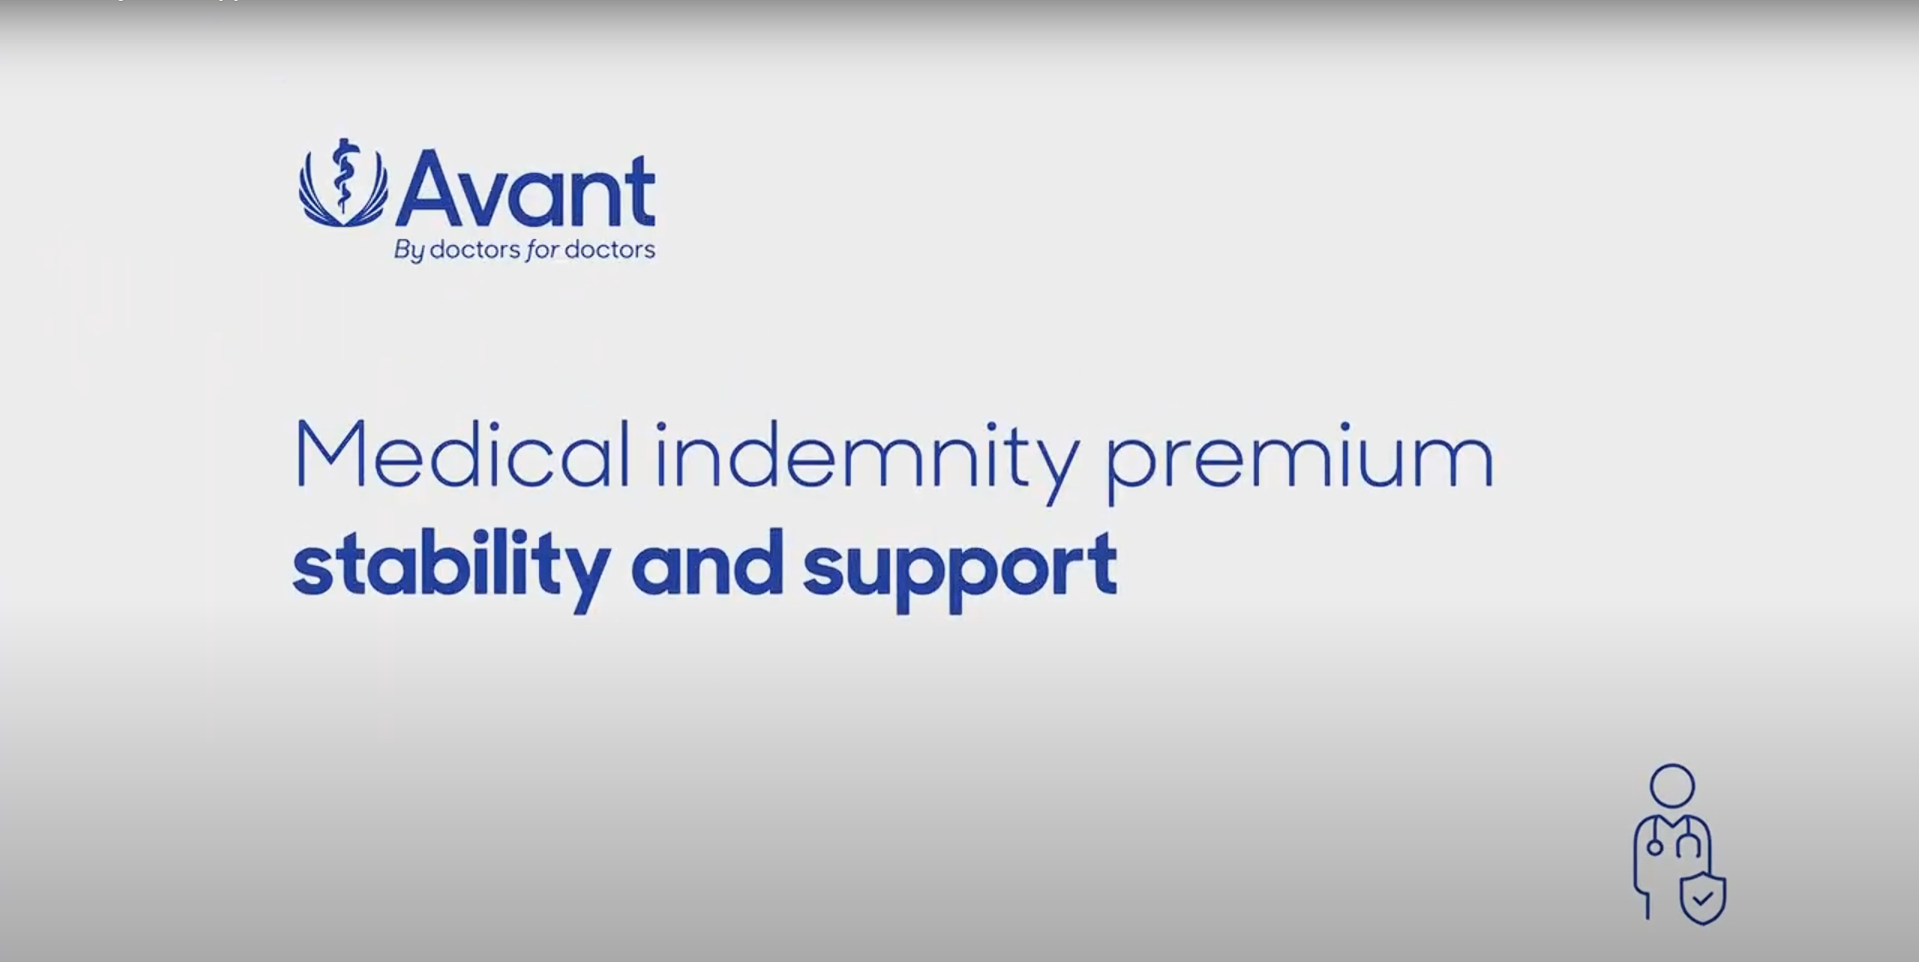 Medical indemnity premium stability and support text thumbnail